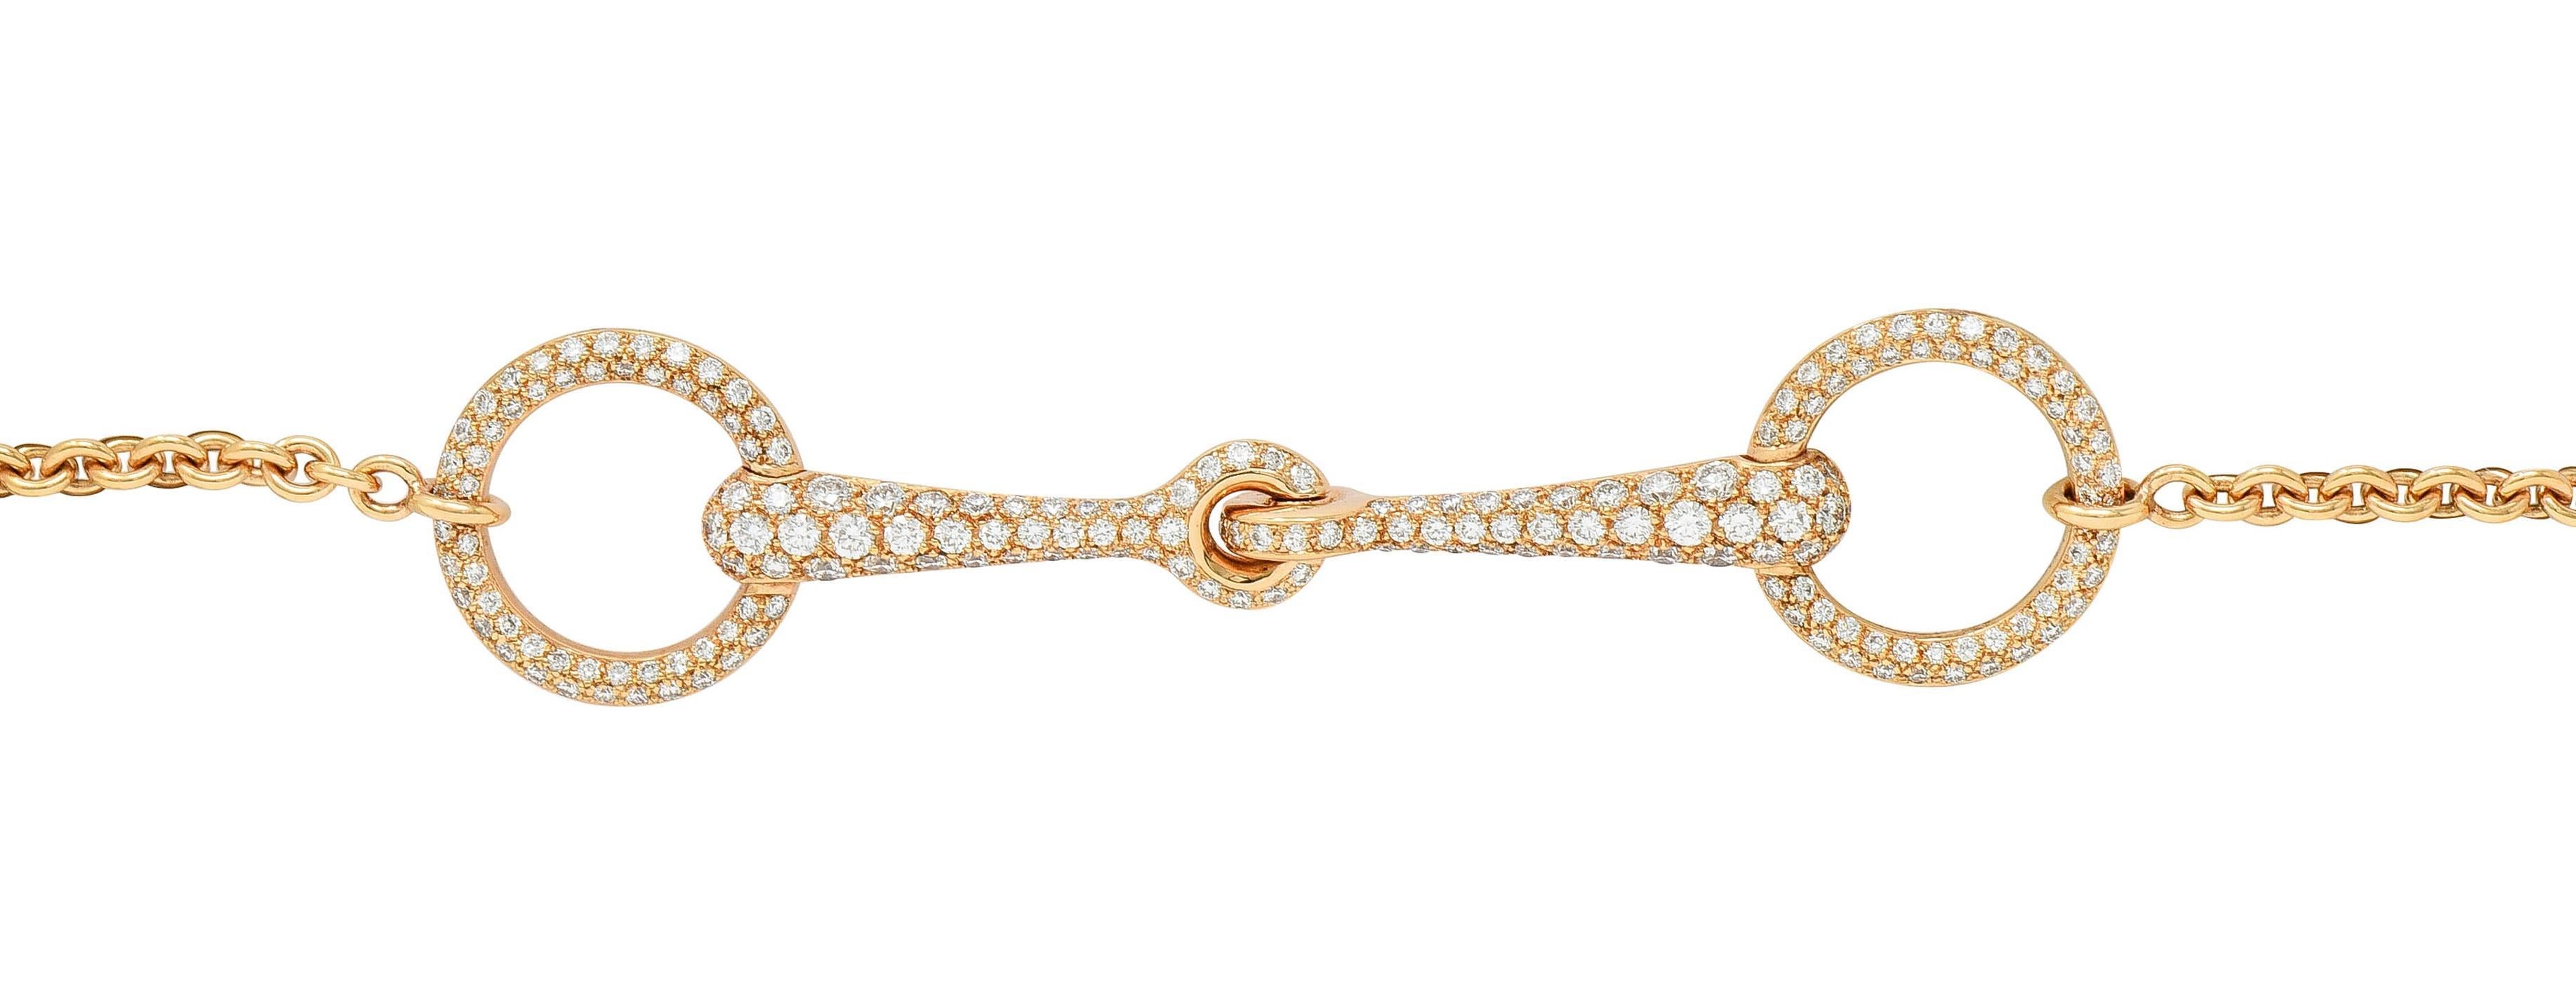 Designed as a cable link chain centering a stylized horse-bit motif 
Pavé set throughout with round brilliant cut diamonds 
With an additional diamond bezel set as drop at clasp
Weighing 0.96 carat total - F color with VS2 clarity
Completed by